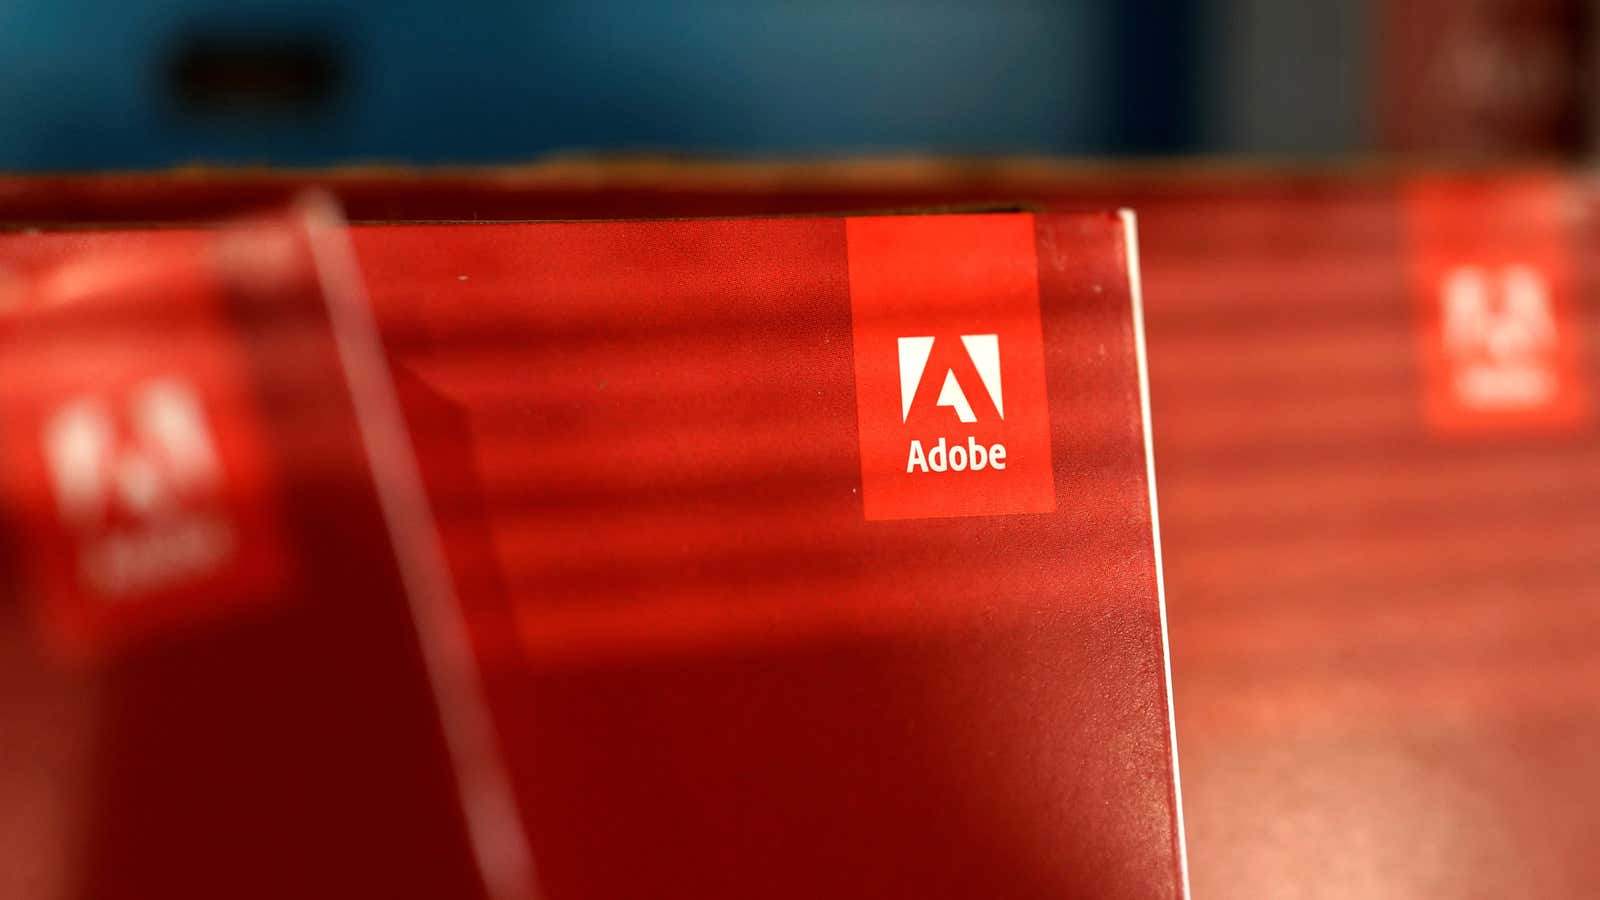 Adobe, like its co-founder, is an original.